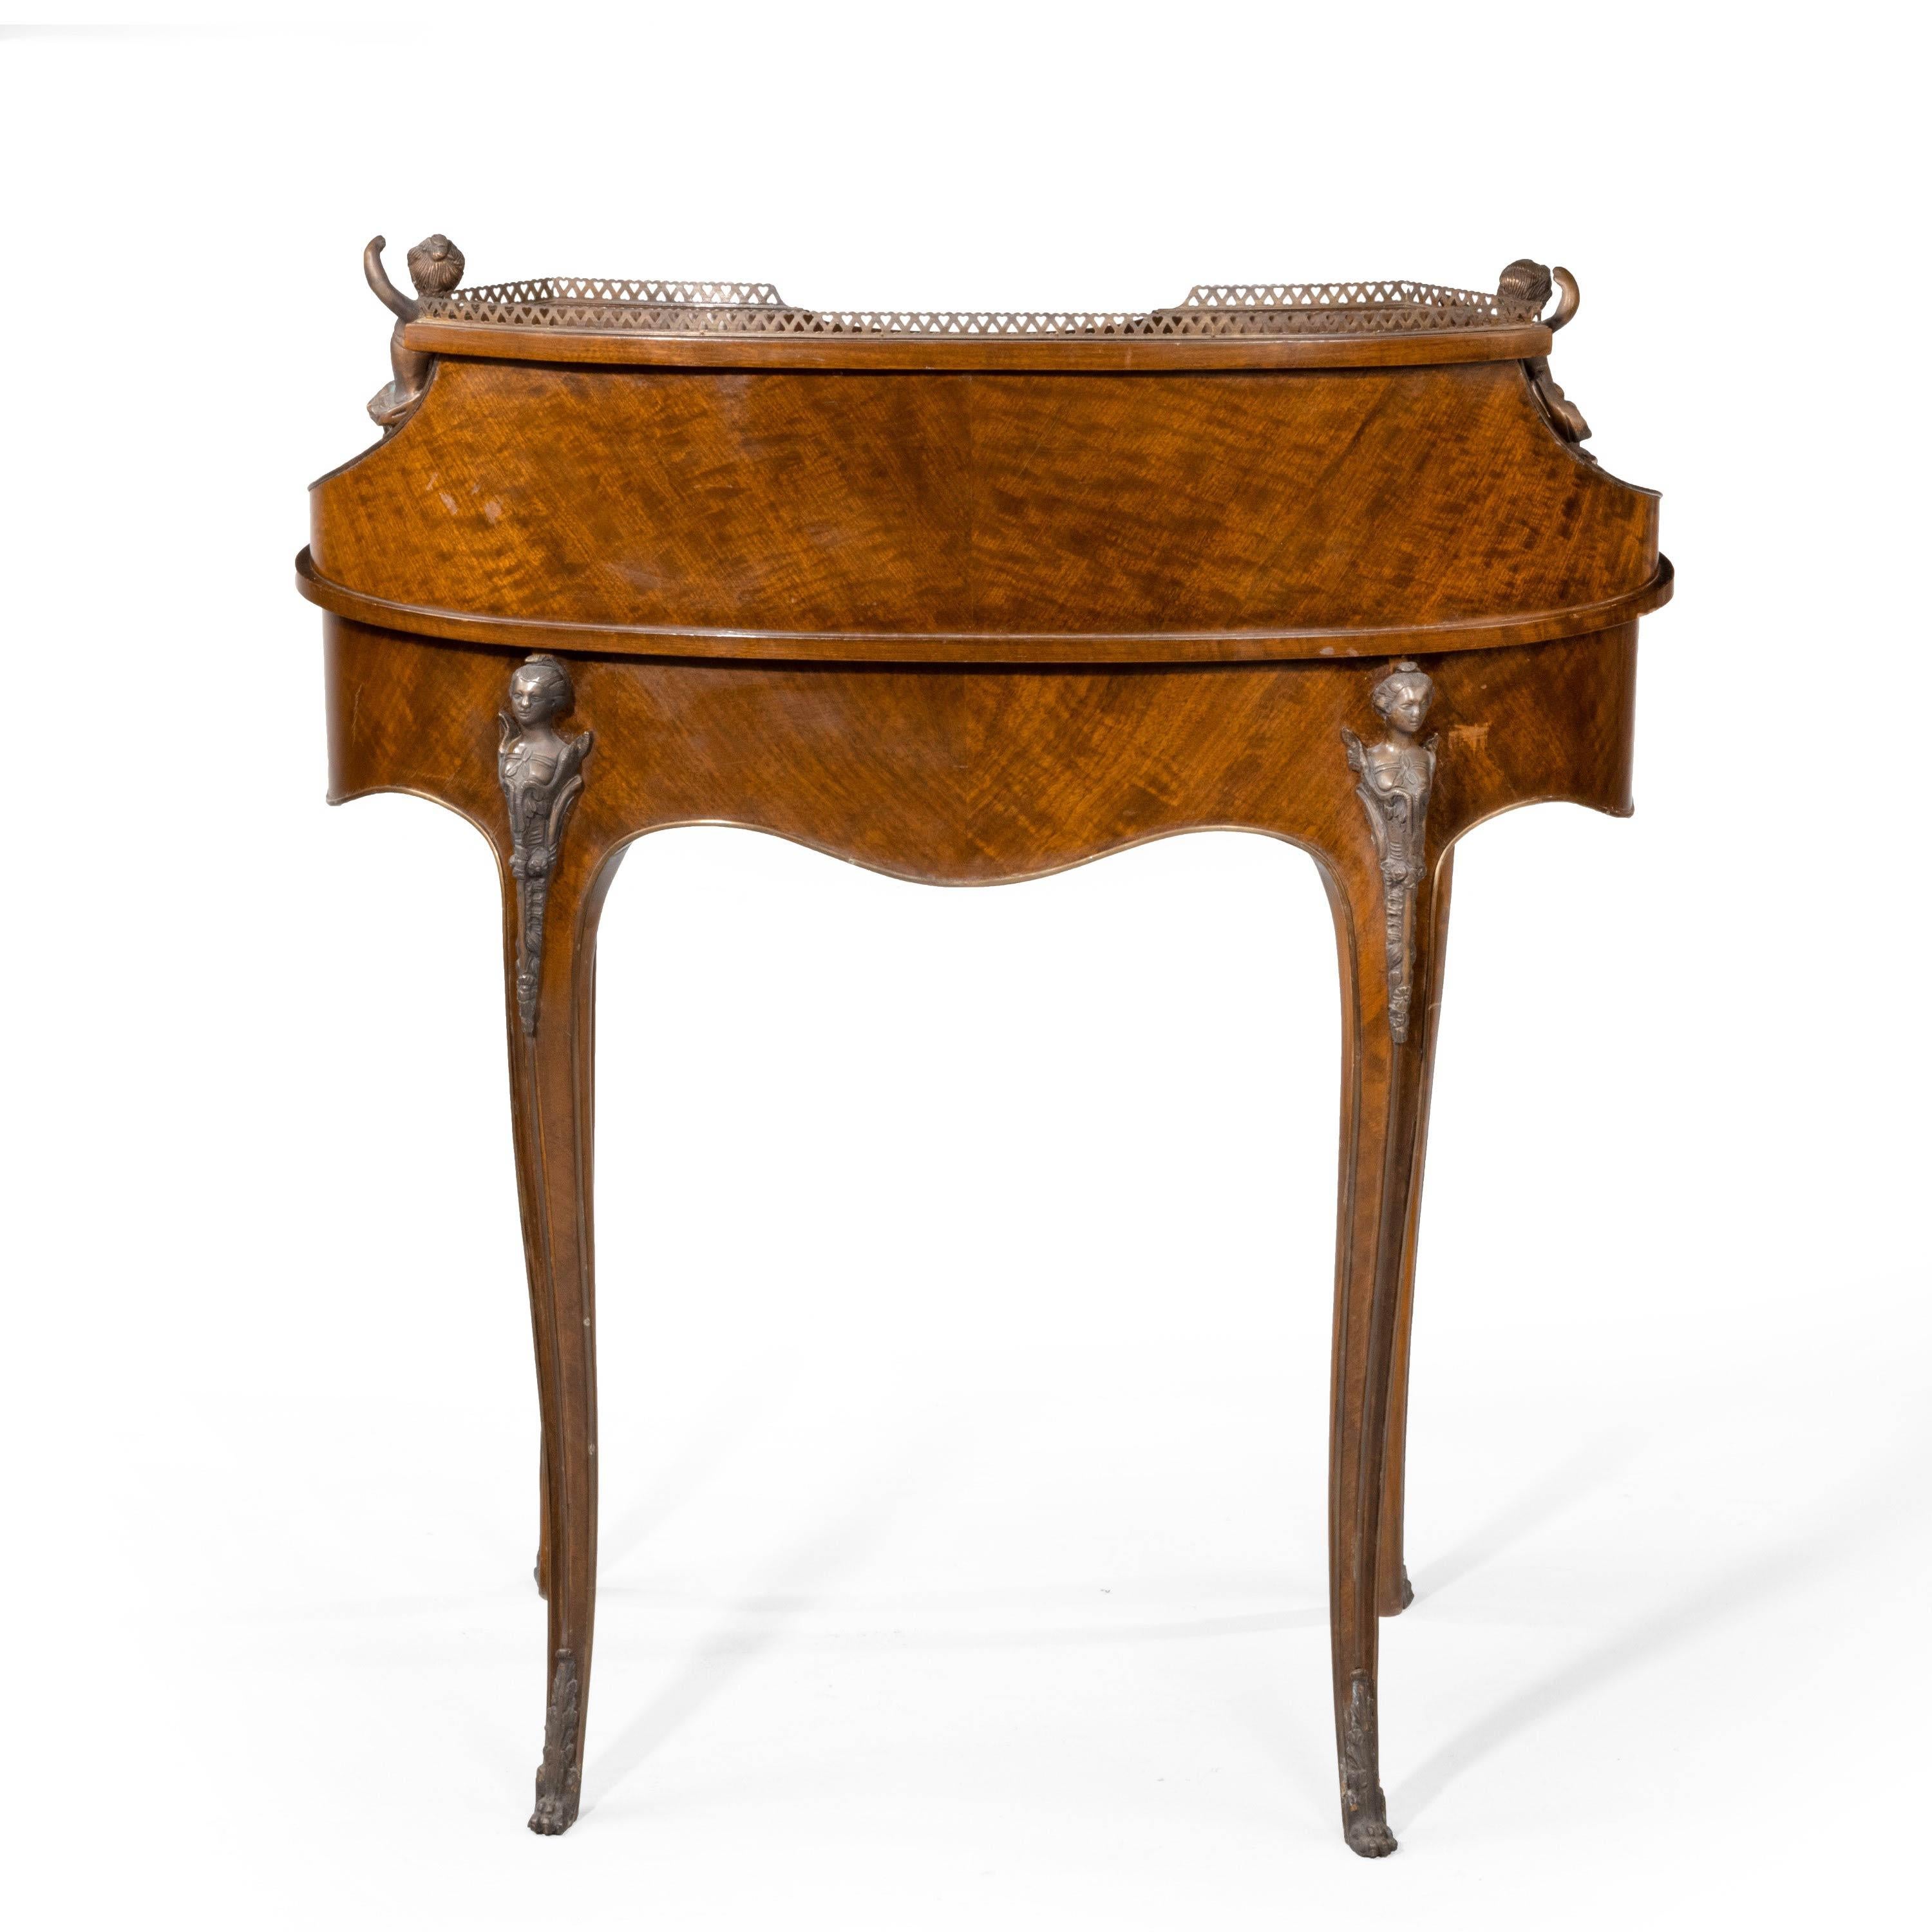 A beautifully figured and constructed French Bureau de Dame. Every side and piece of complex shape. With beautiful cast bronze Putti and decorations.